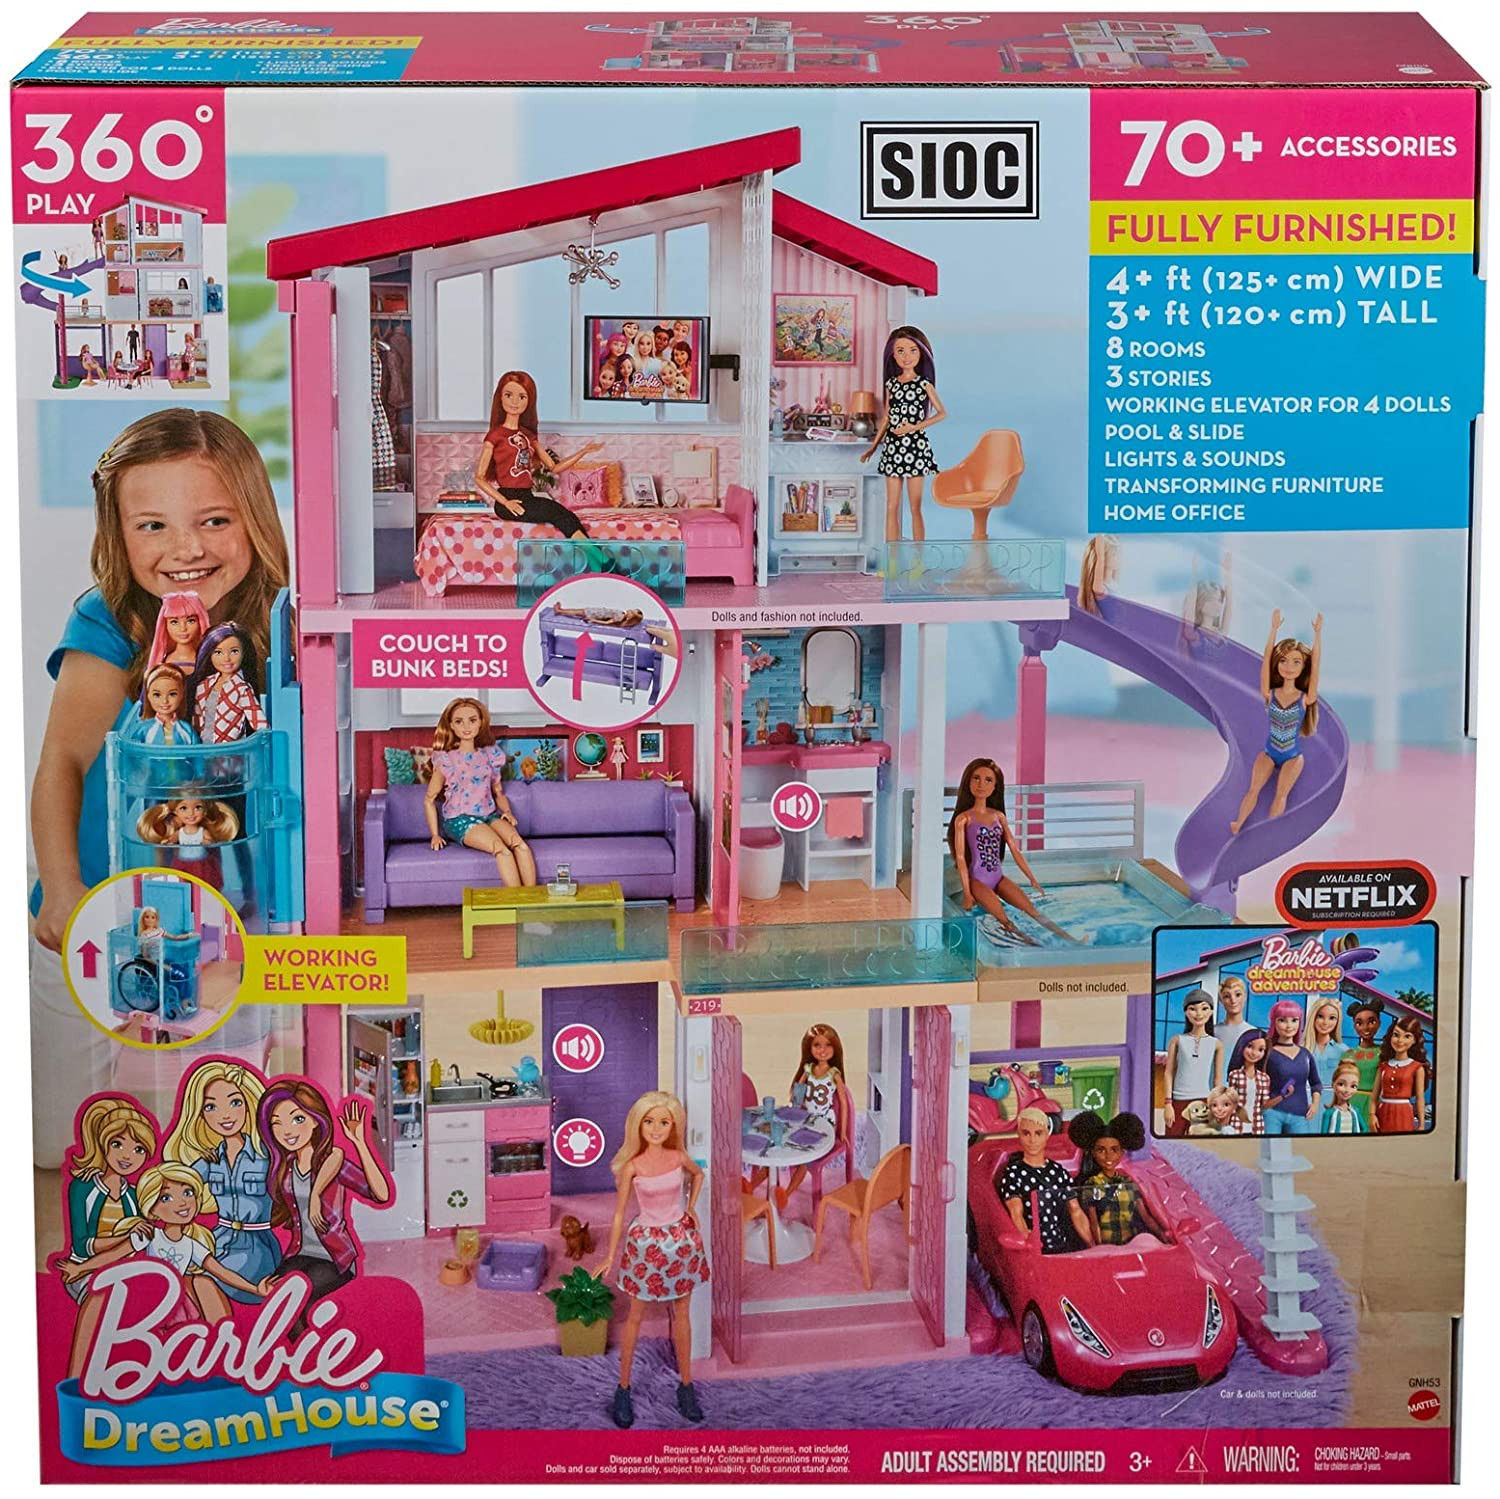 Barbie Dreamhouse Dollhouse with Wheelchair Accessible Elevator, Pool, Slide and 70 Accessories Including Furniture and Household Items